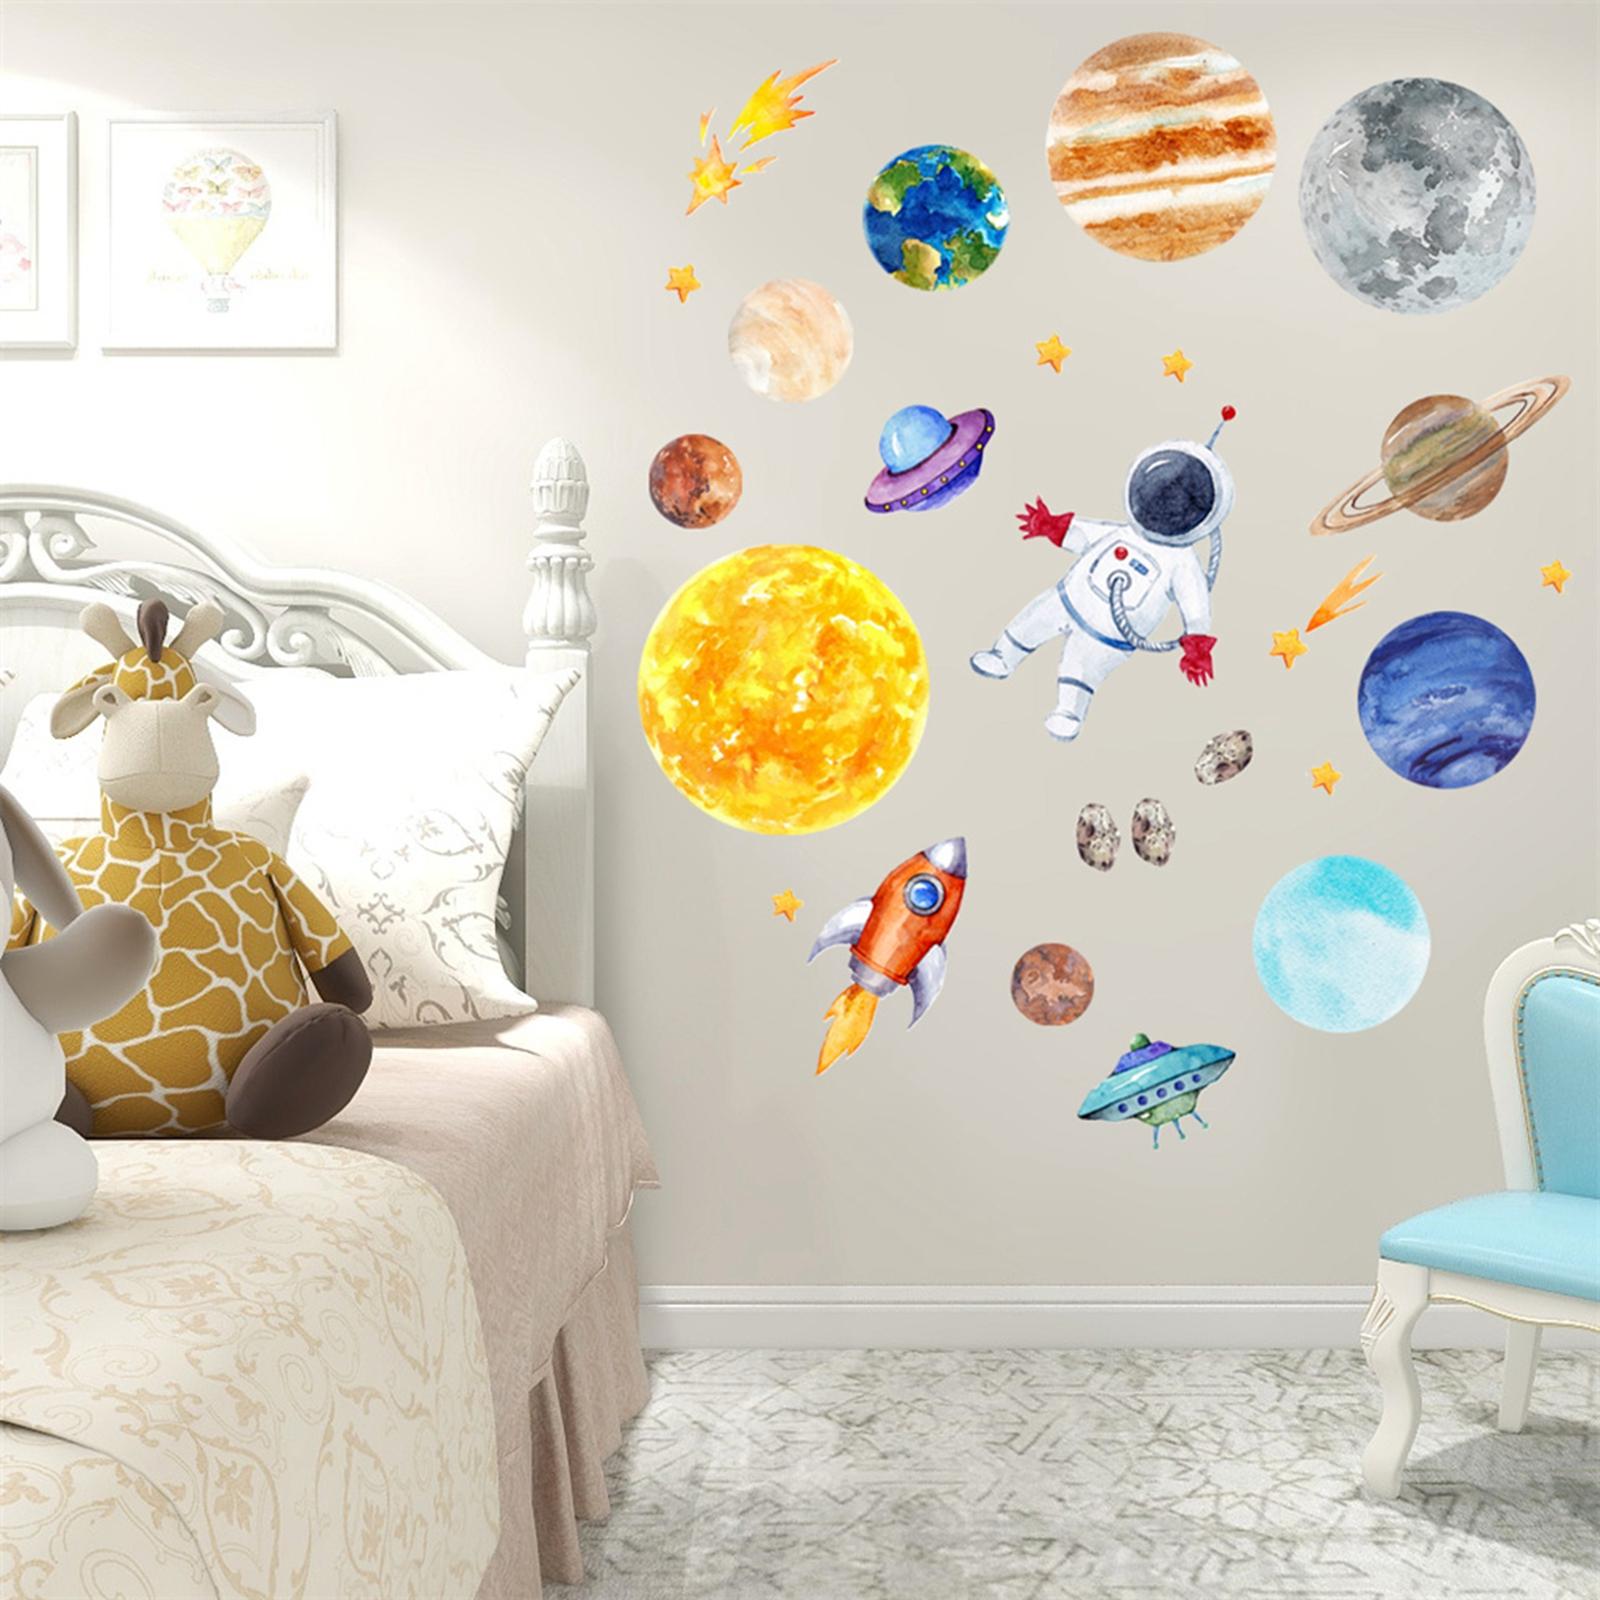  Space Wall Sticker Murals DIY Playroom Home Room Planet Wall Decal